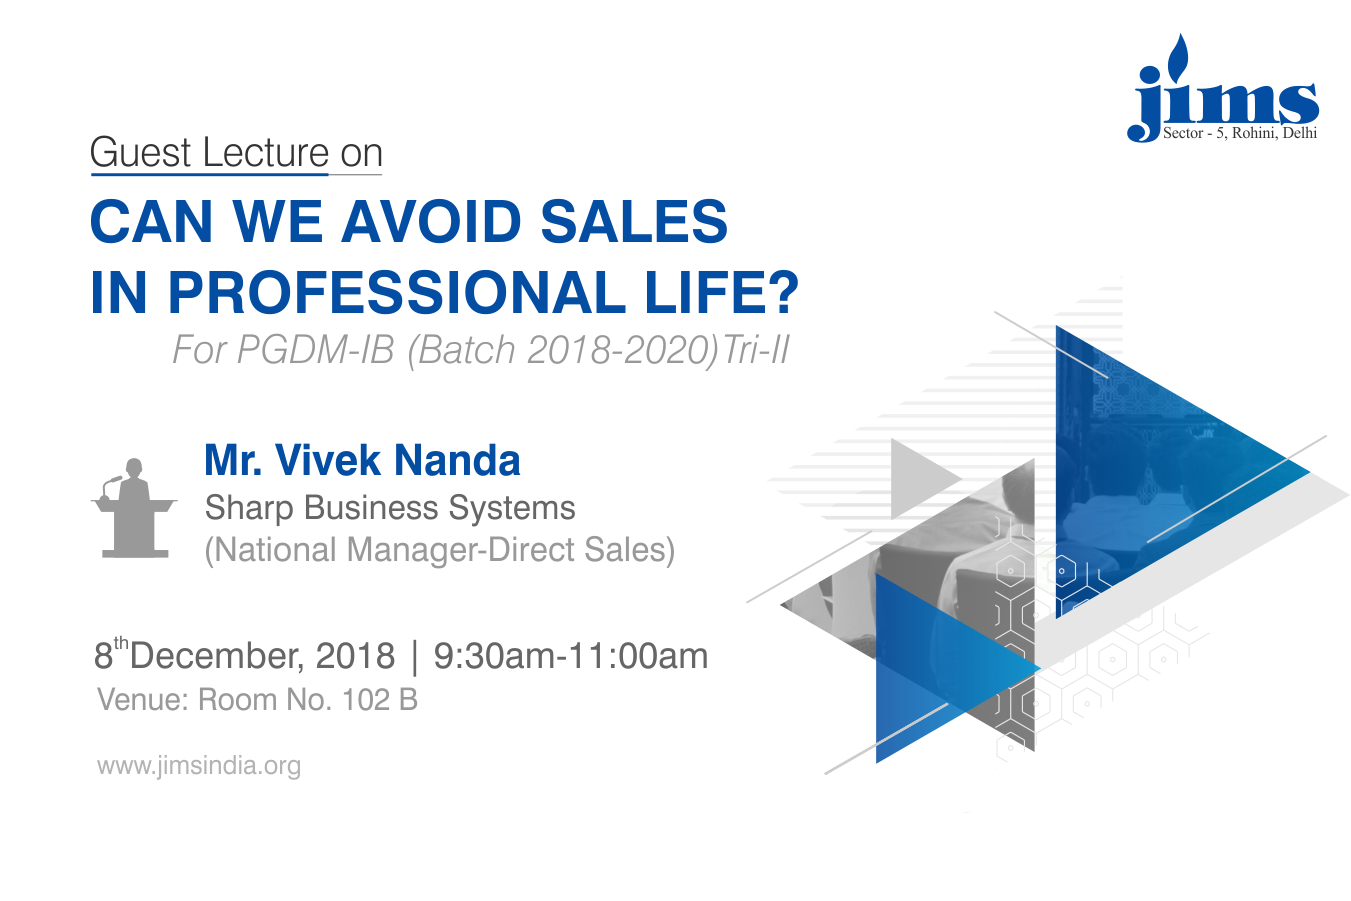 JIMS Rohini organising Guest Lecture on Can we avoid sales in professional life?